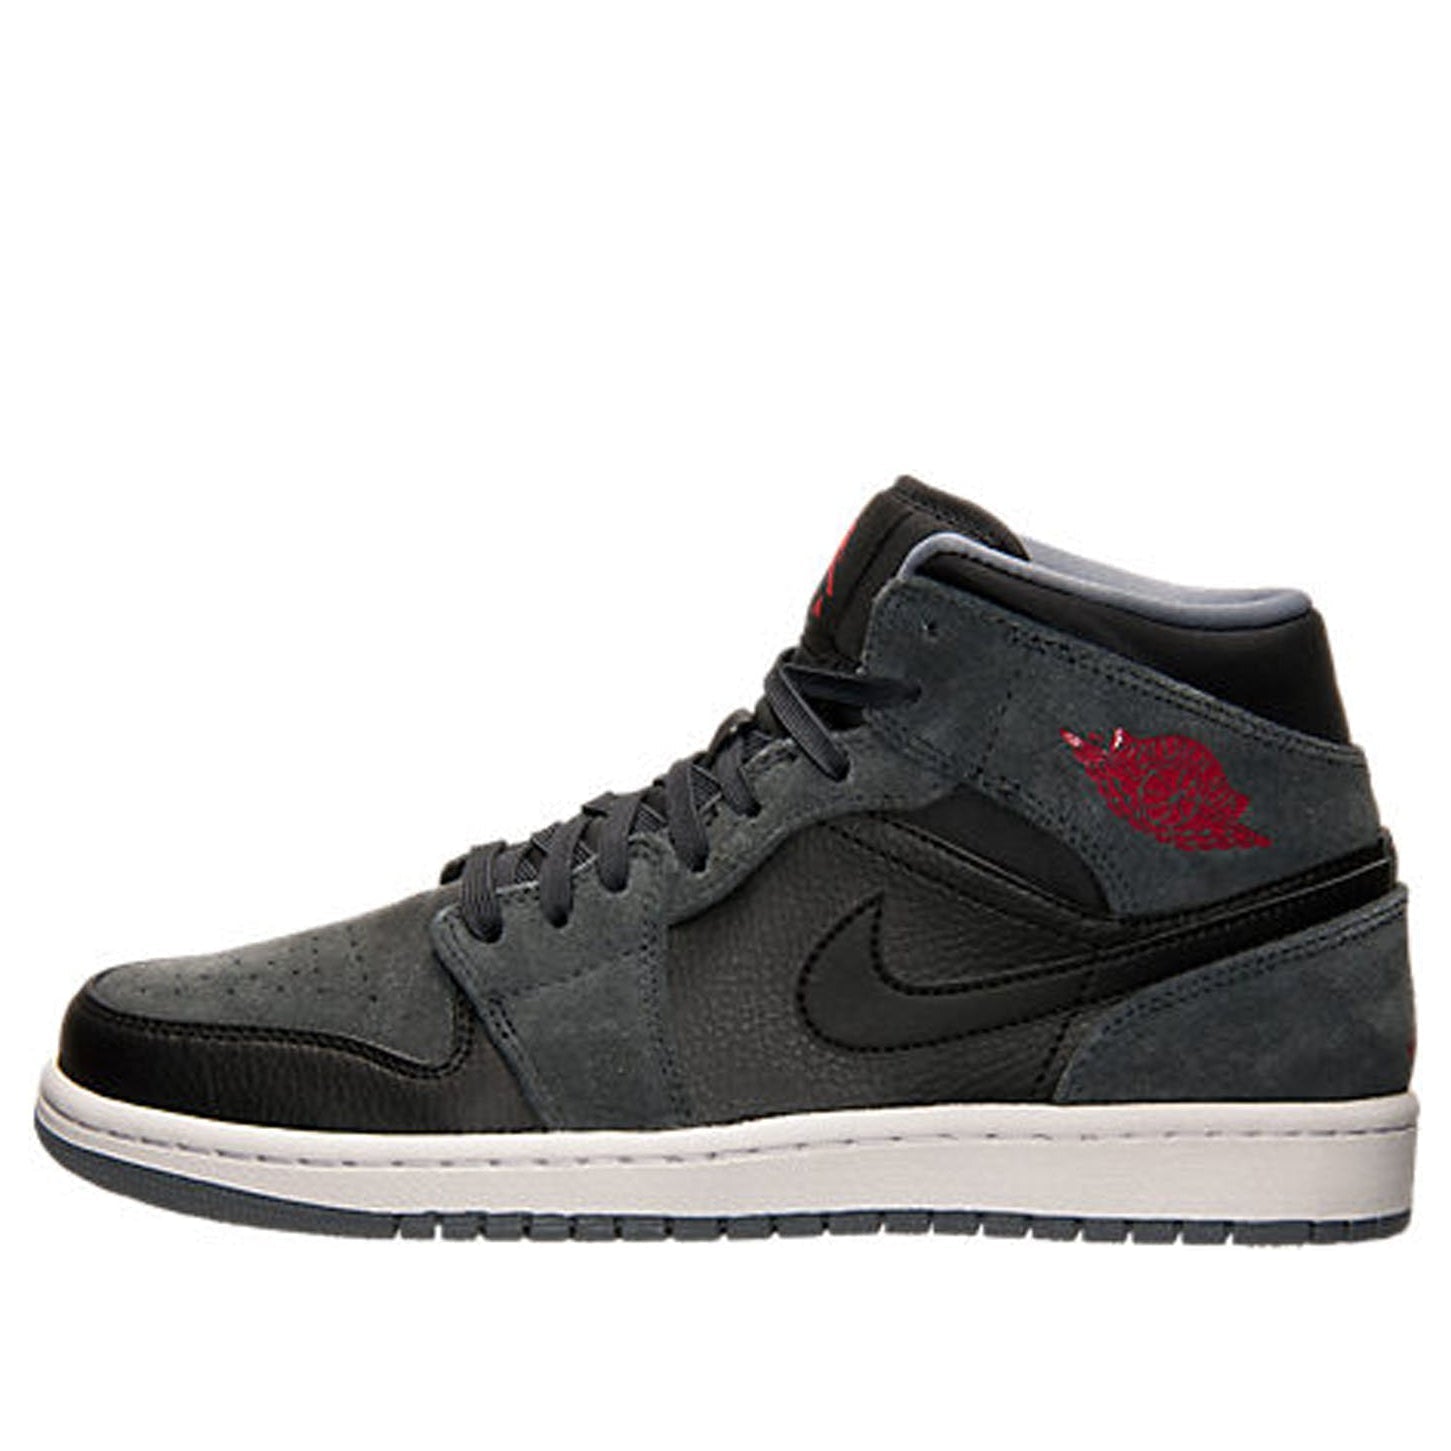 Air Jordan 1 Mid 'Anthracite' Black/Gym Red-Anthrct-Cl Gry 554724-018